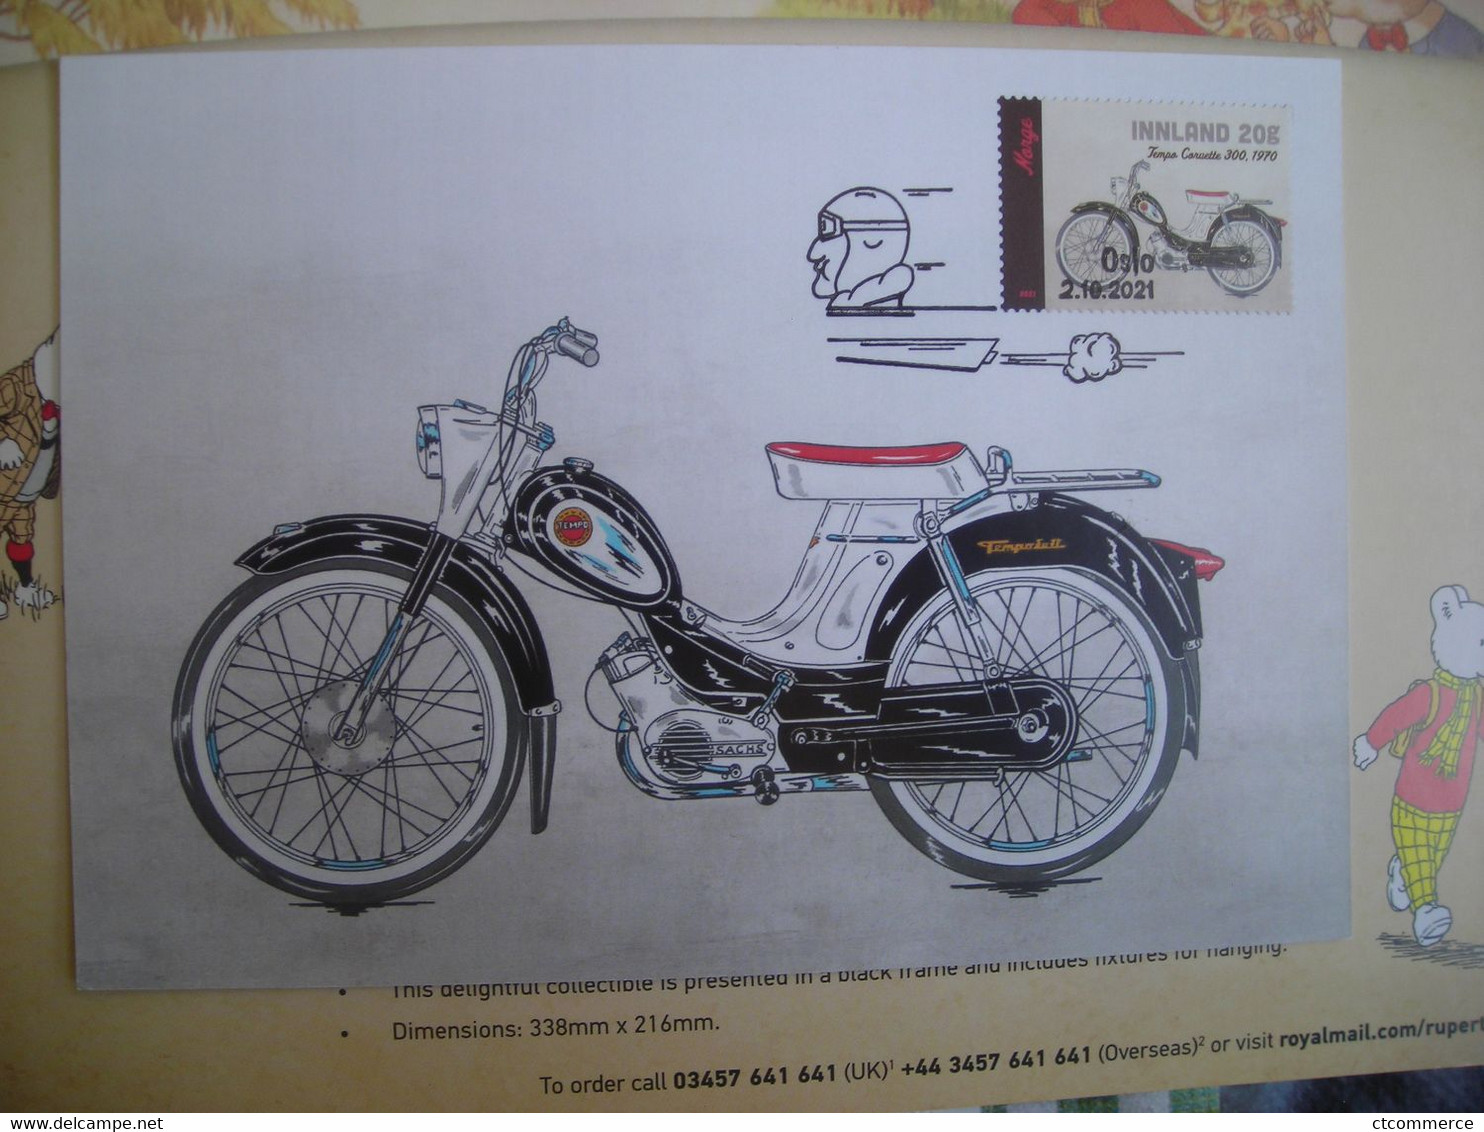 Mopeds and Motorcycles (4 x Maxi Cards) 2021